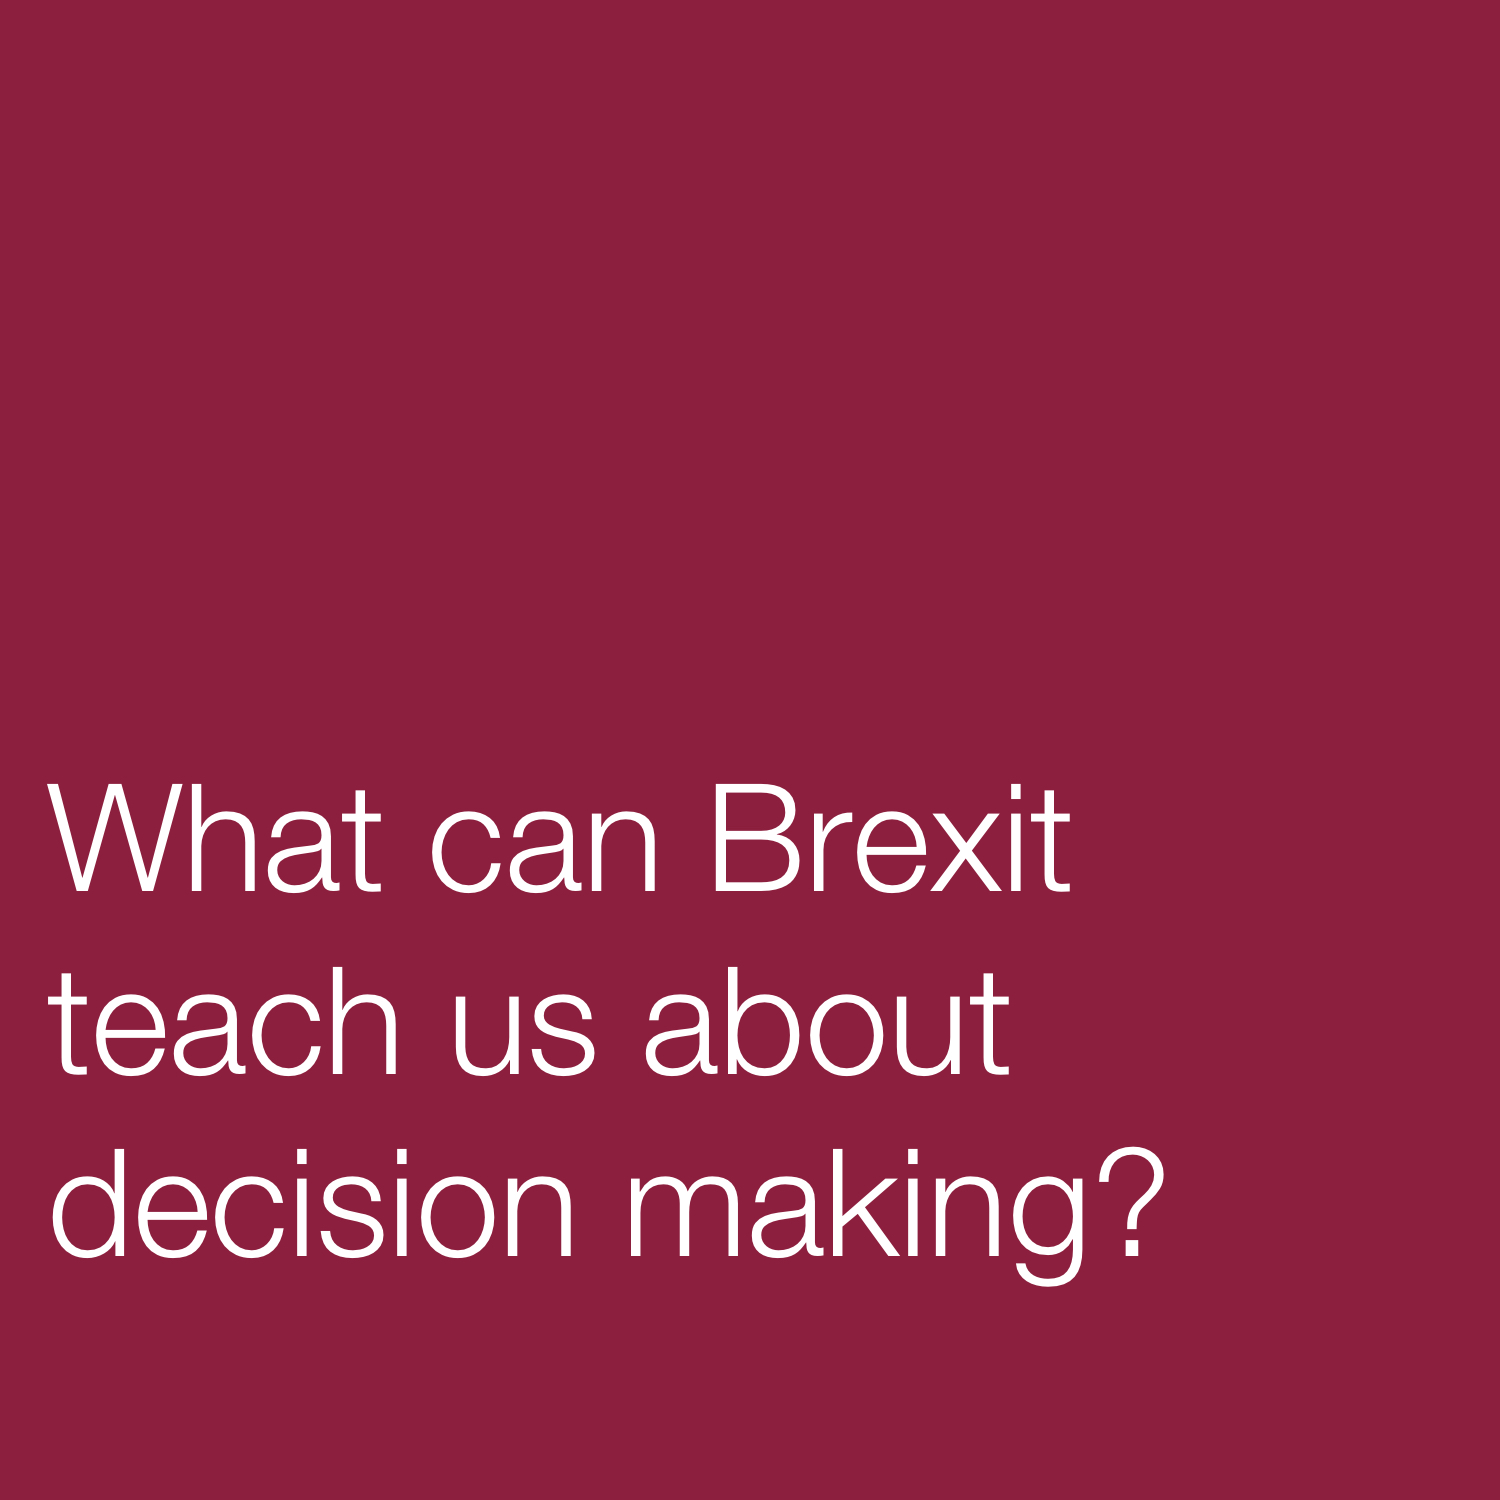 What can Brexit teach us about decision making?